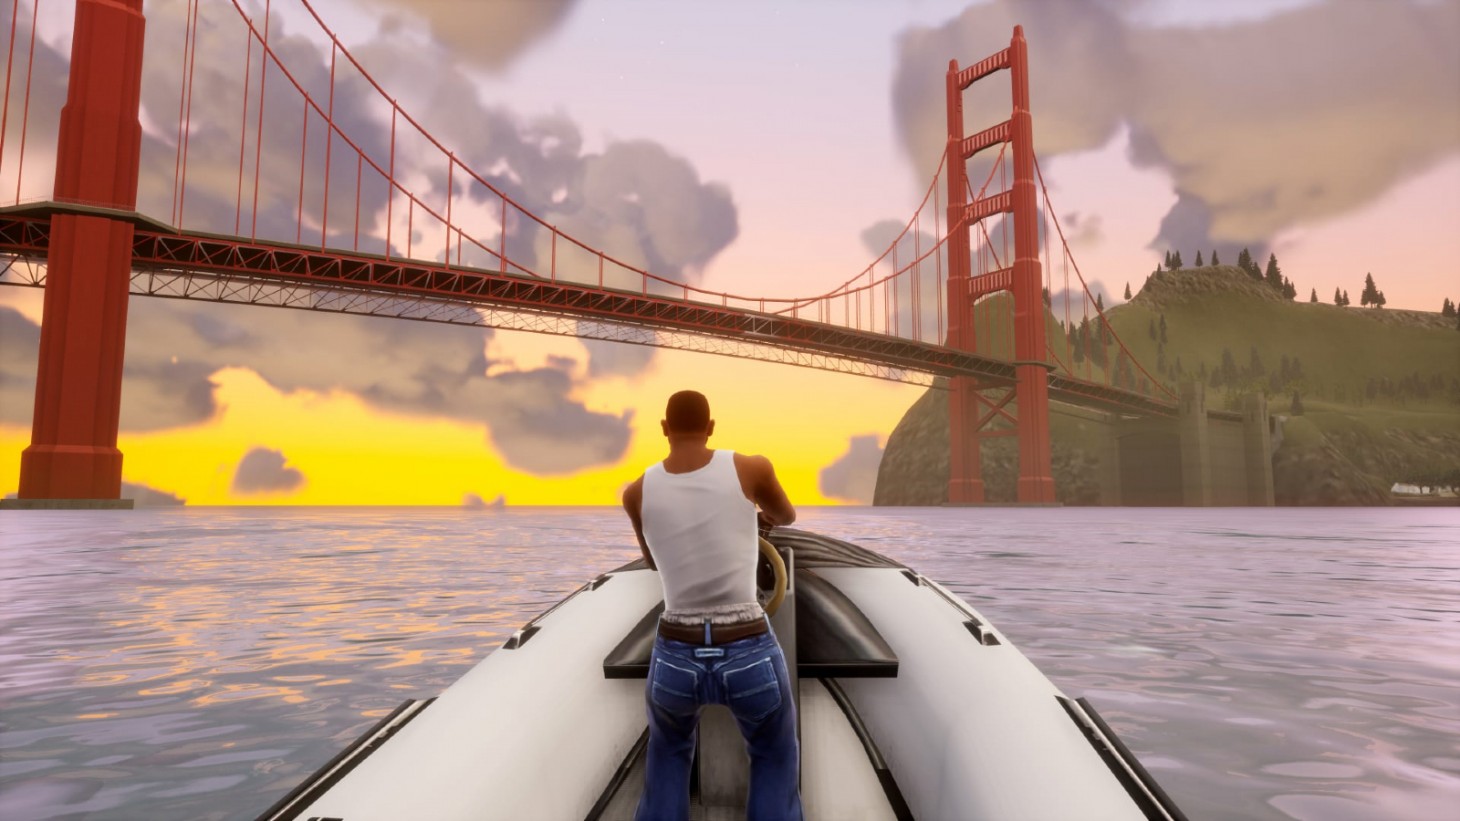 GTA San Andreas cheats for PC, PlayStation, Xbox, Android: Here's the  complete list